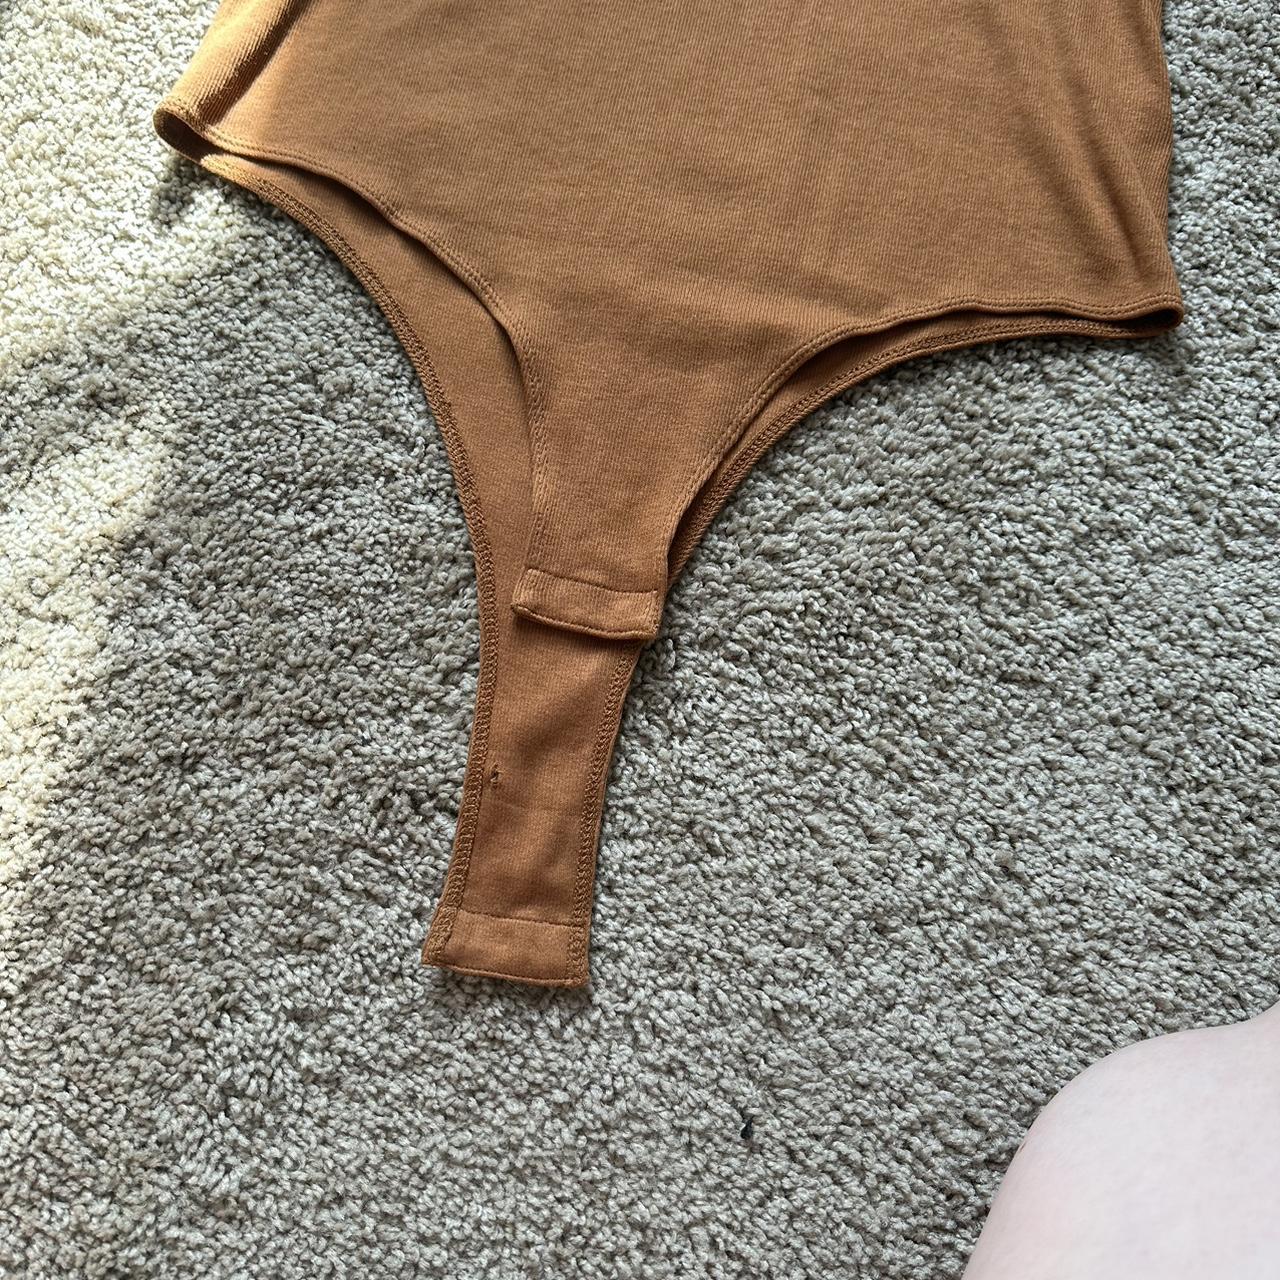 A New Day Women's Brown and Tan Bodysuit (5)